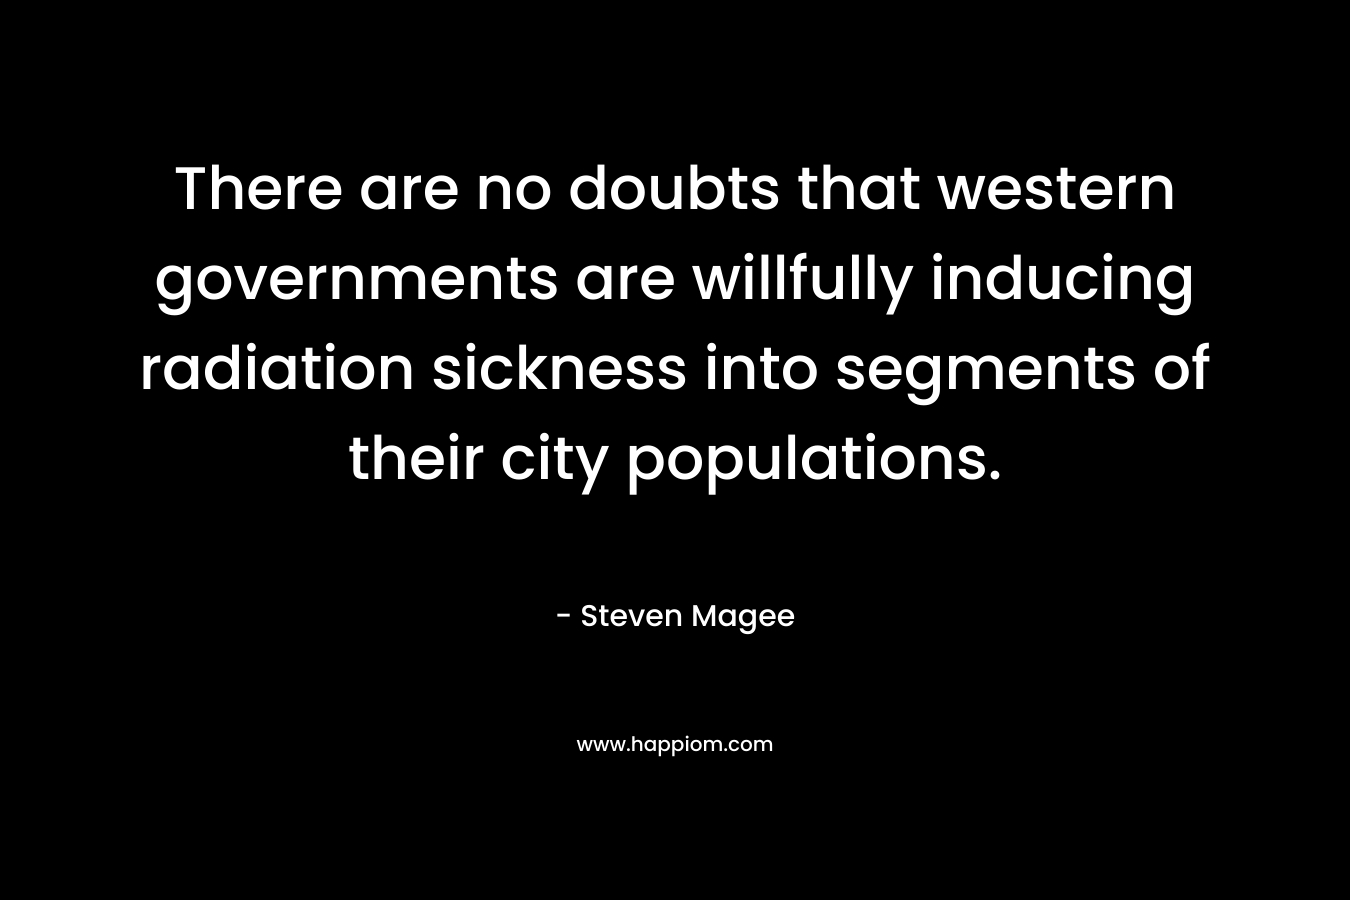 There are no doubts that western governments are willfully inducing radiation sickness into segments of their city populations. – Steven Magee